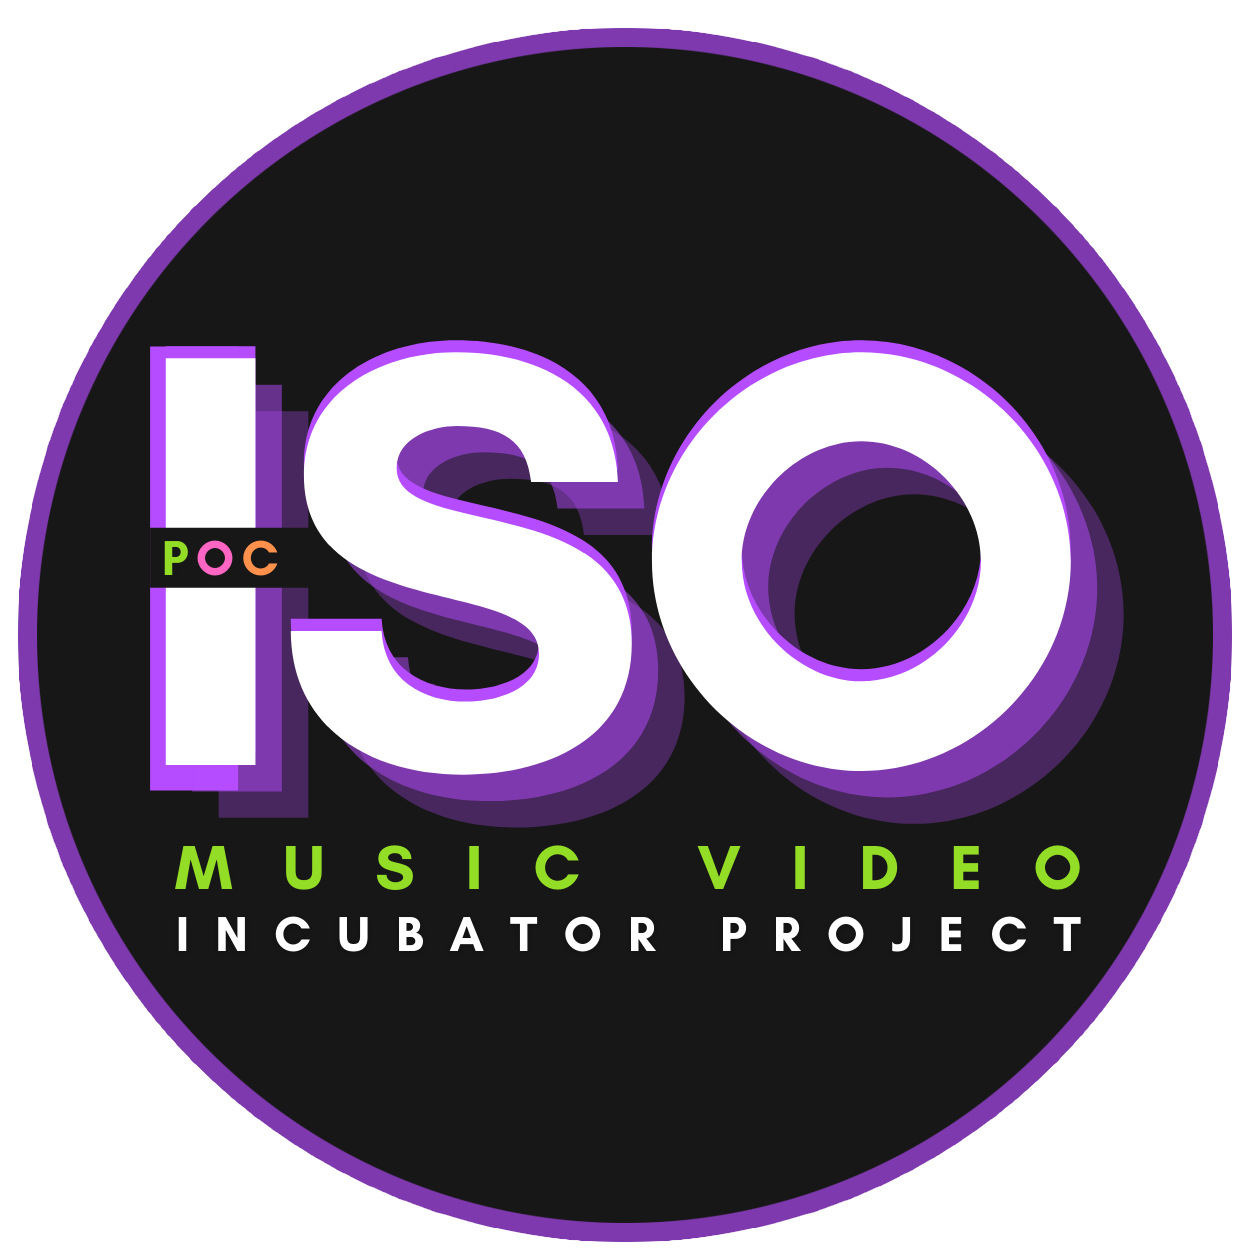 ISO Music Video Incubator Project